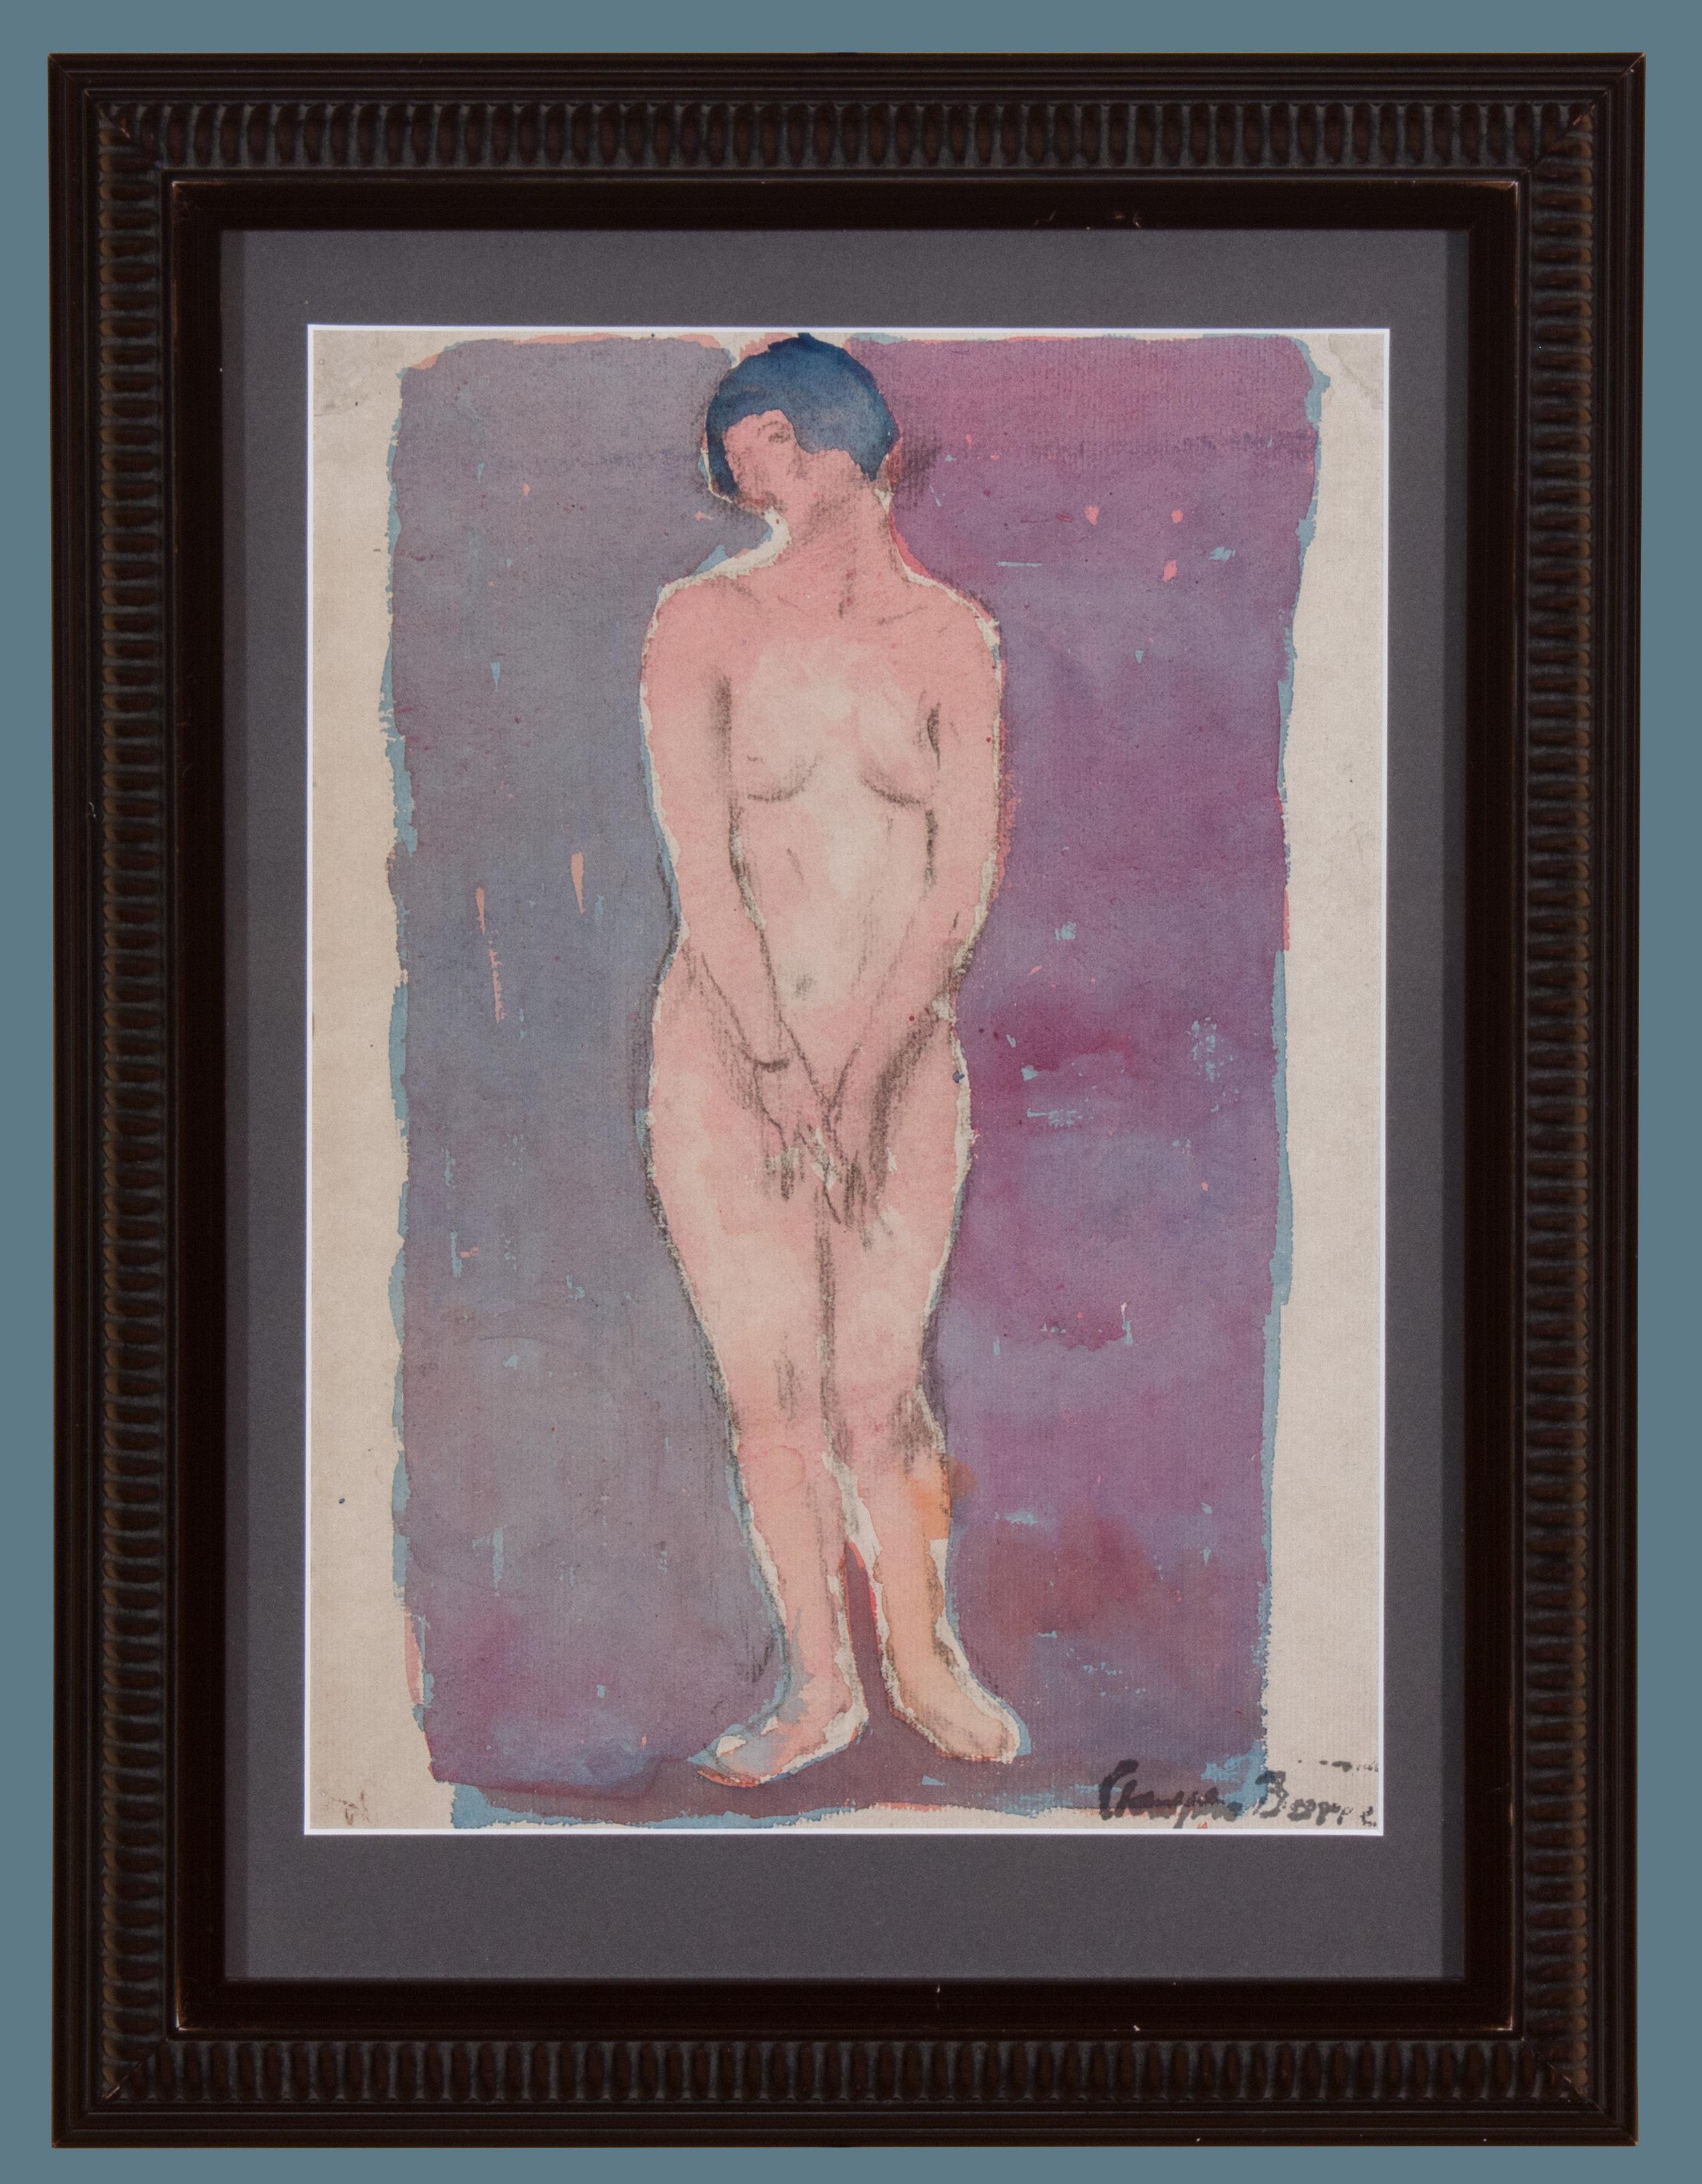 ADOLPHE BORIE
(American, 1877-1934)
Standing Female Nude
Wash & charcoal on gray laid paper, 12 x 9 inches
Framed: 16 x 13 inches
Estate stamp lower right

Born in Philadelphia, Adolphe Borie was able to study at the Pennsylvania Academy of the Fine